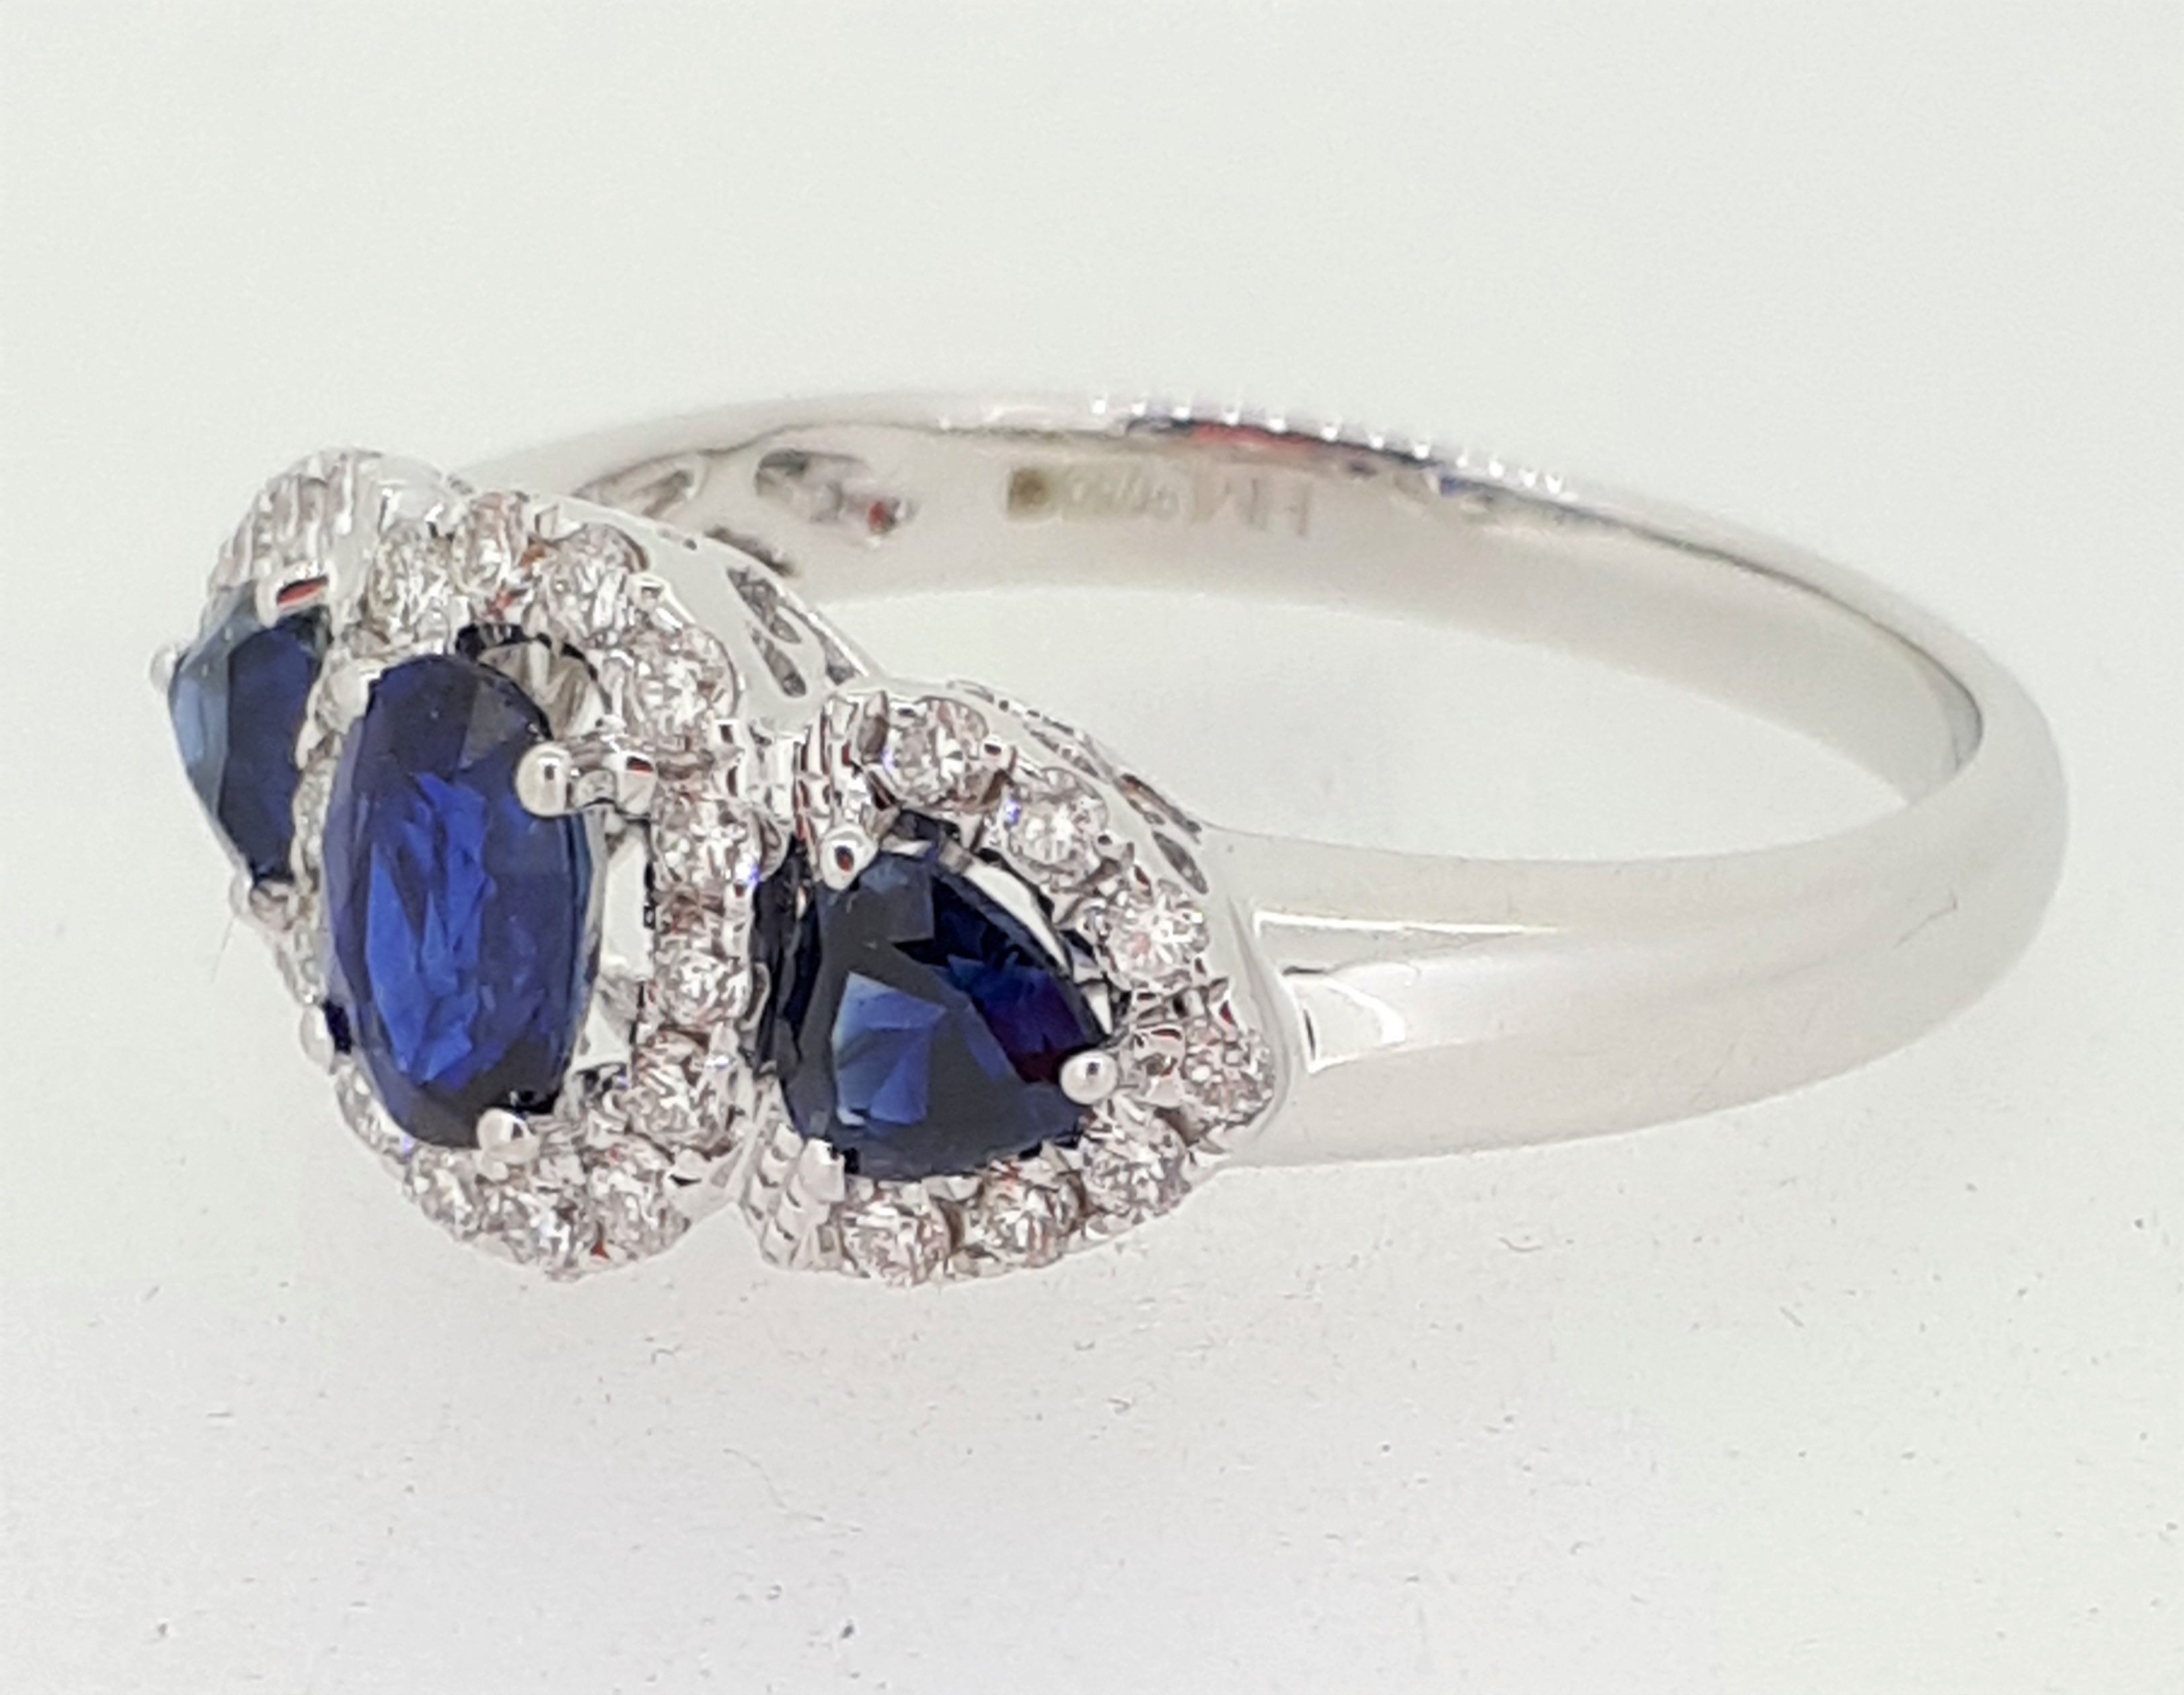 18ct (750) White Gold 1.26ct Oval Sapphire & 0.38ct Diamond Cluster Ring - Image 3 of 6